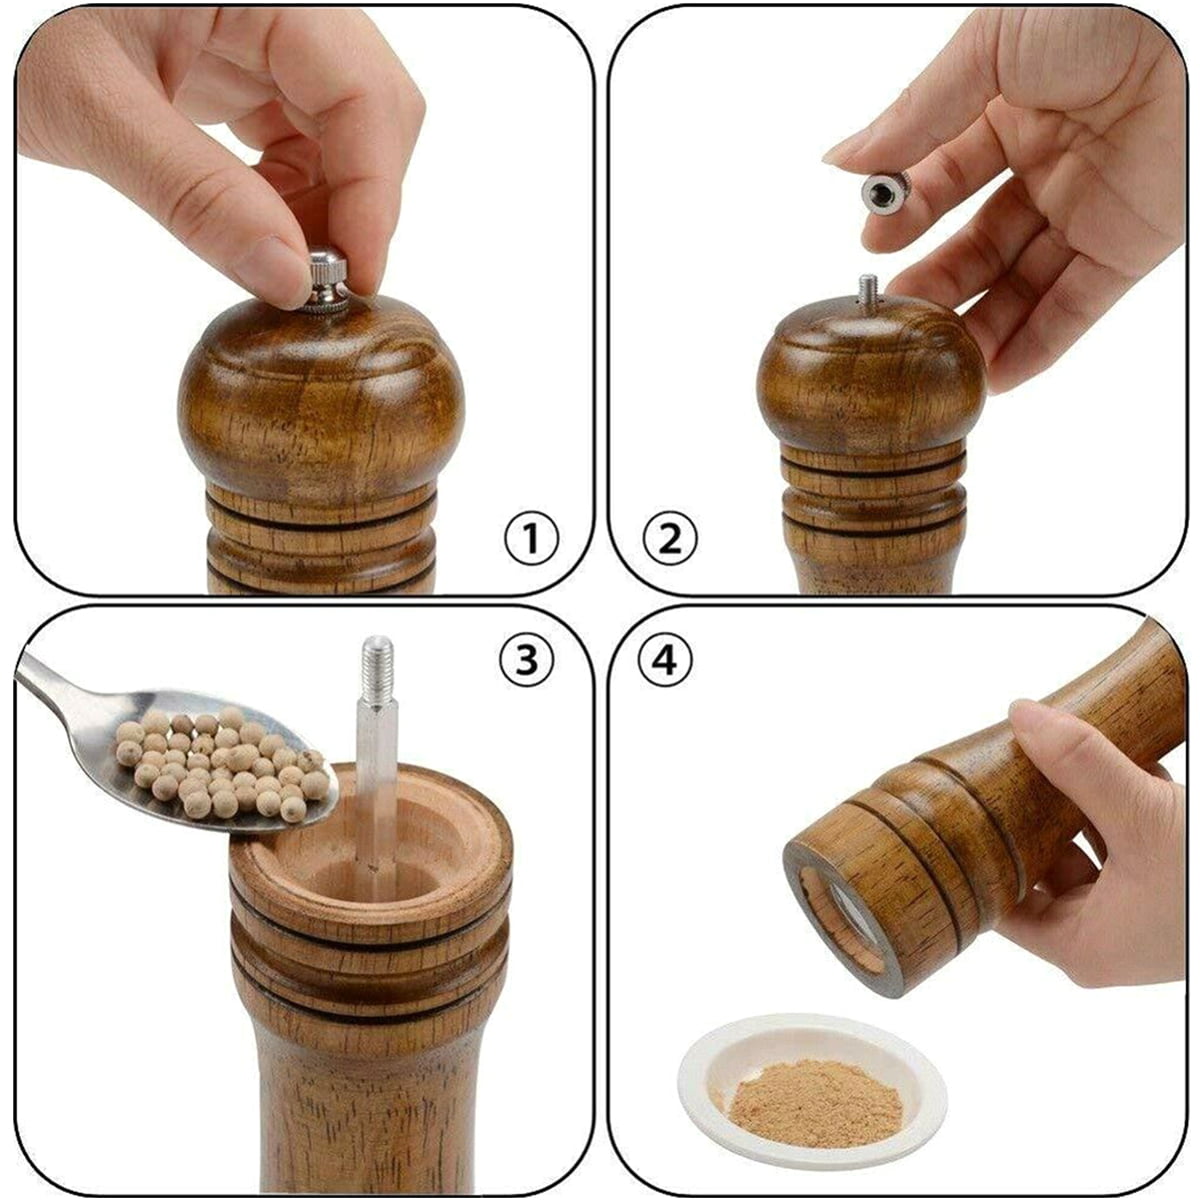 Salt and Pepper Mill Wood Small With Adjustable Stainless Steel Grinder  Gift Idea Spice Mill Set of 2 Manual Black GREYMOUNT® FUJI 